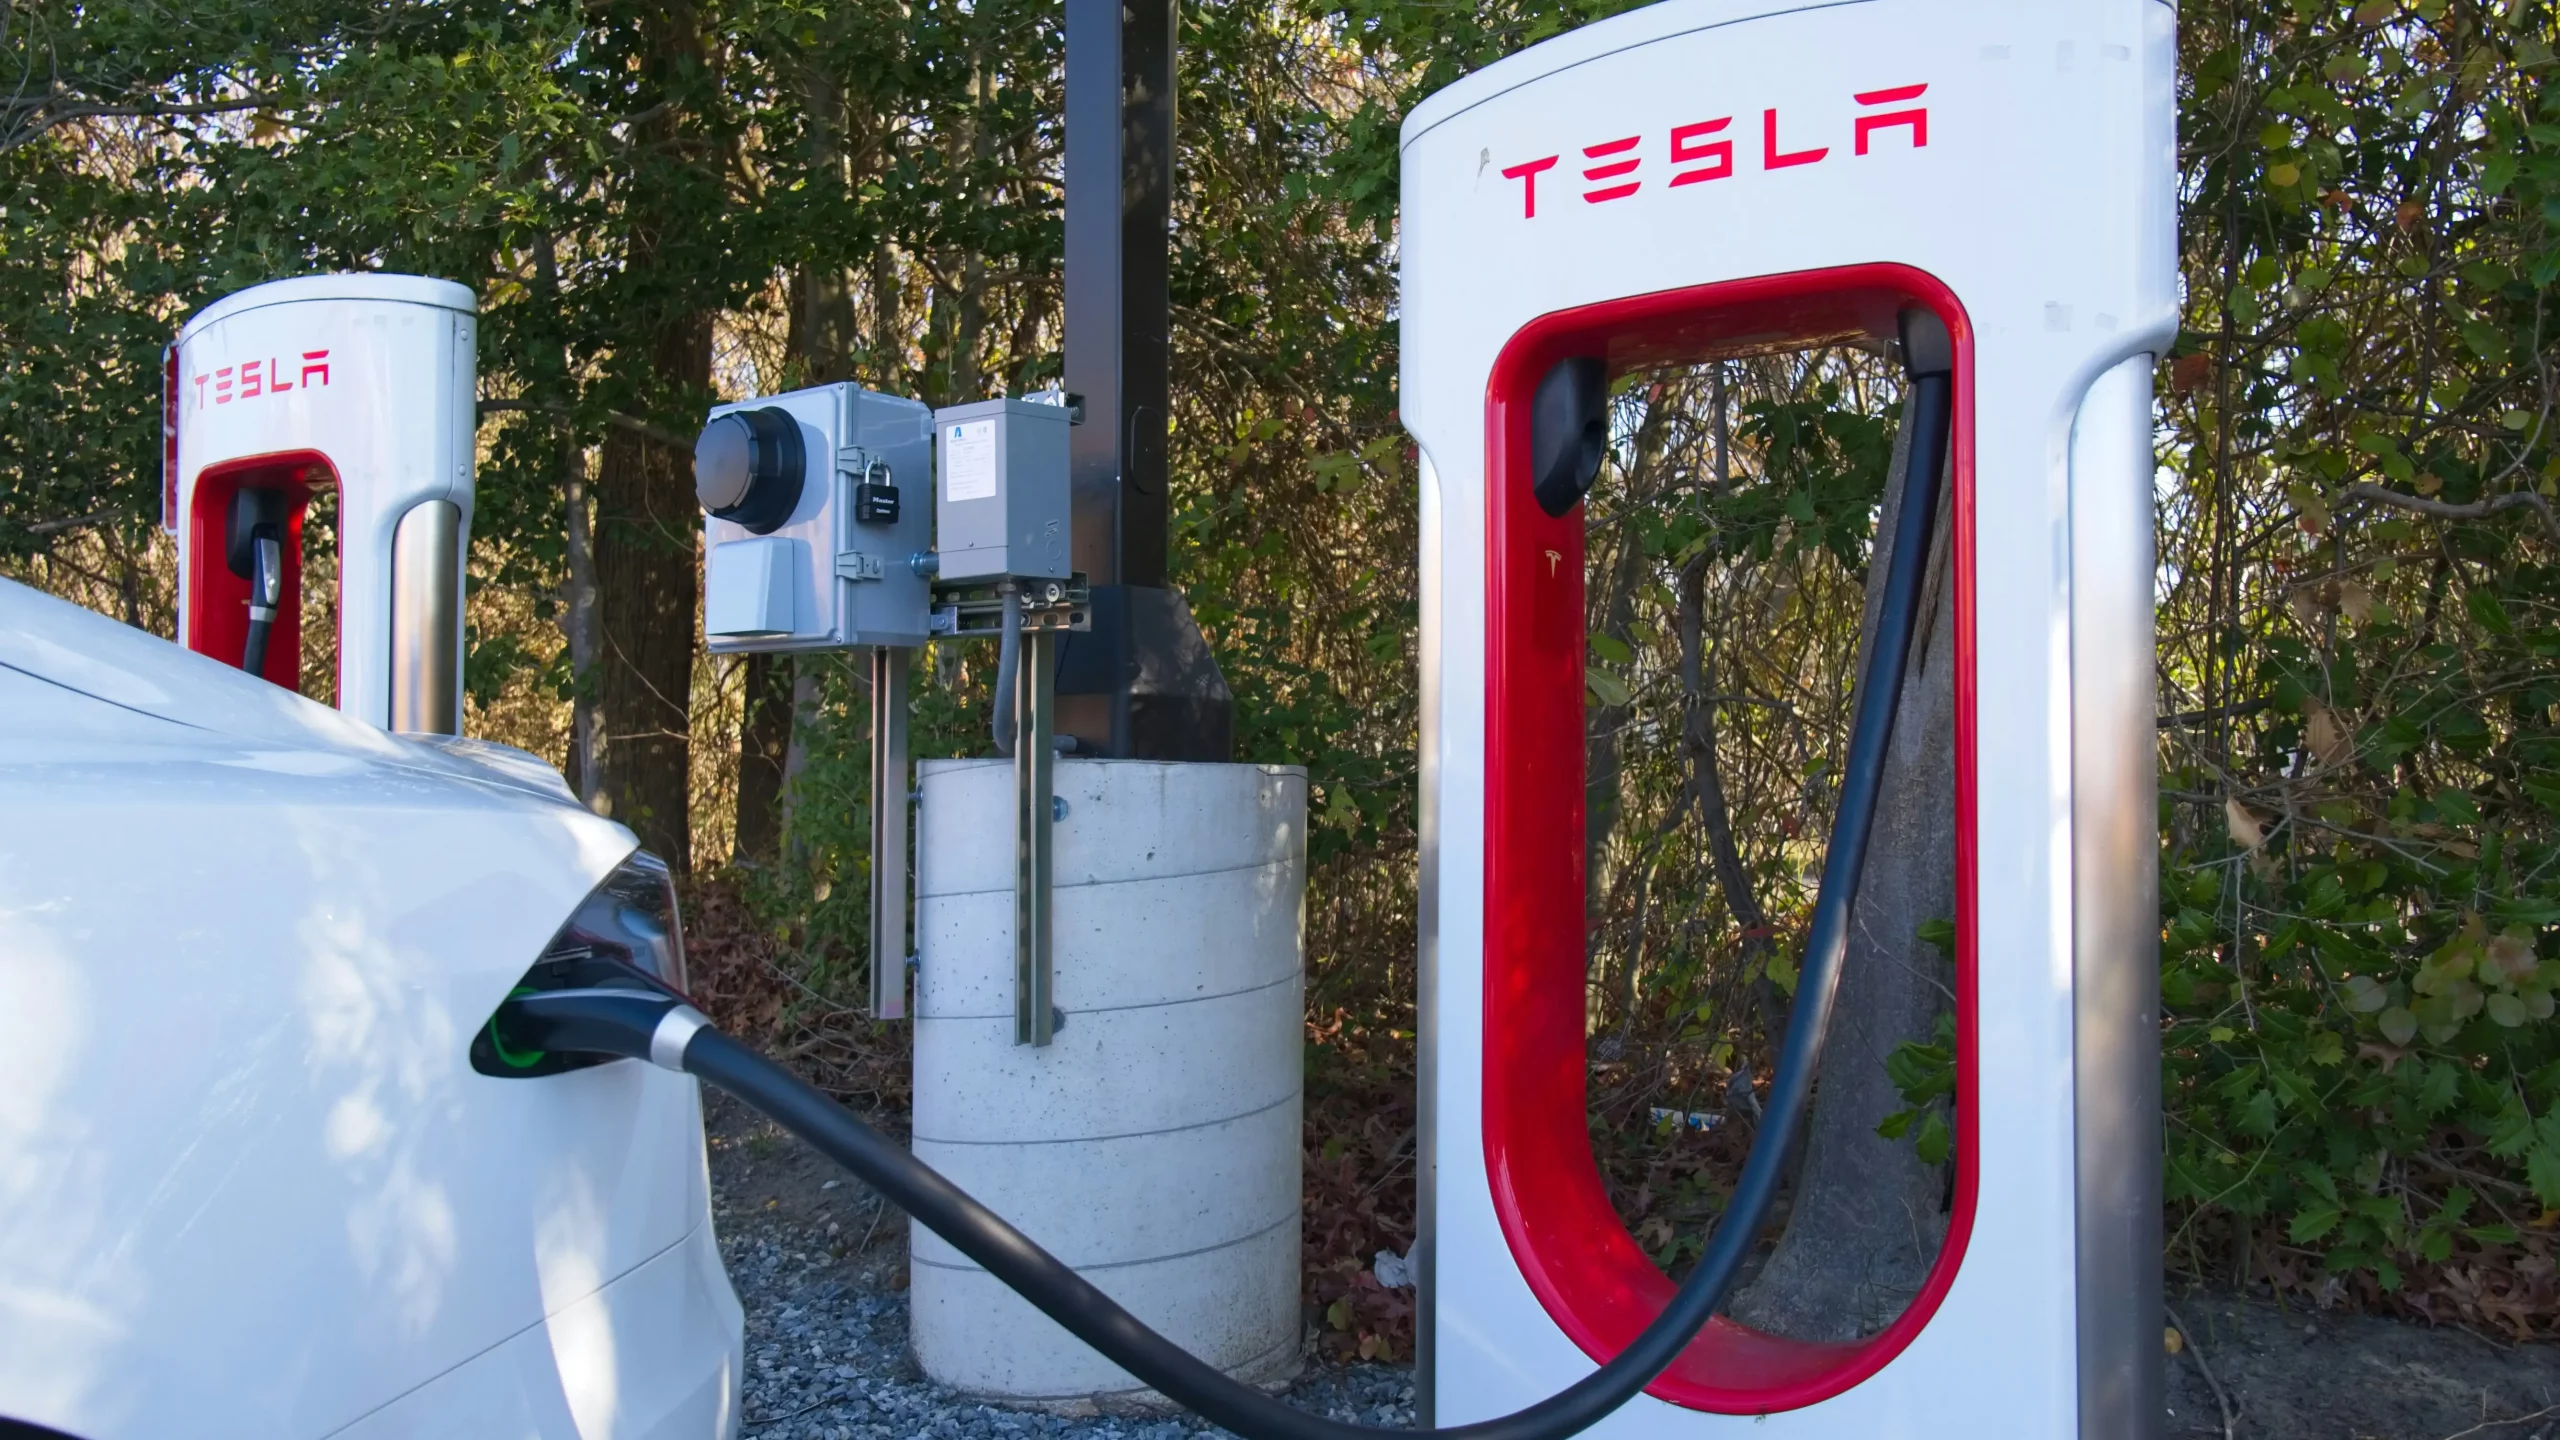 Tesla electric vehicle charging at a station, showcasing the benefits of EV tax credits.